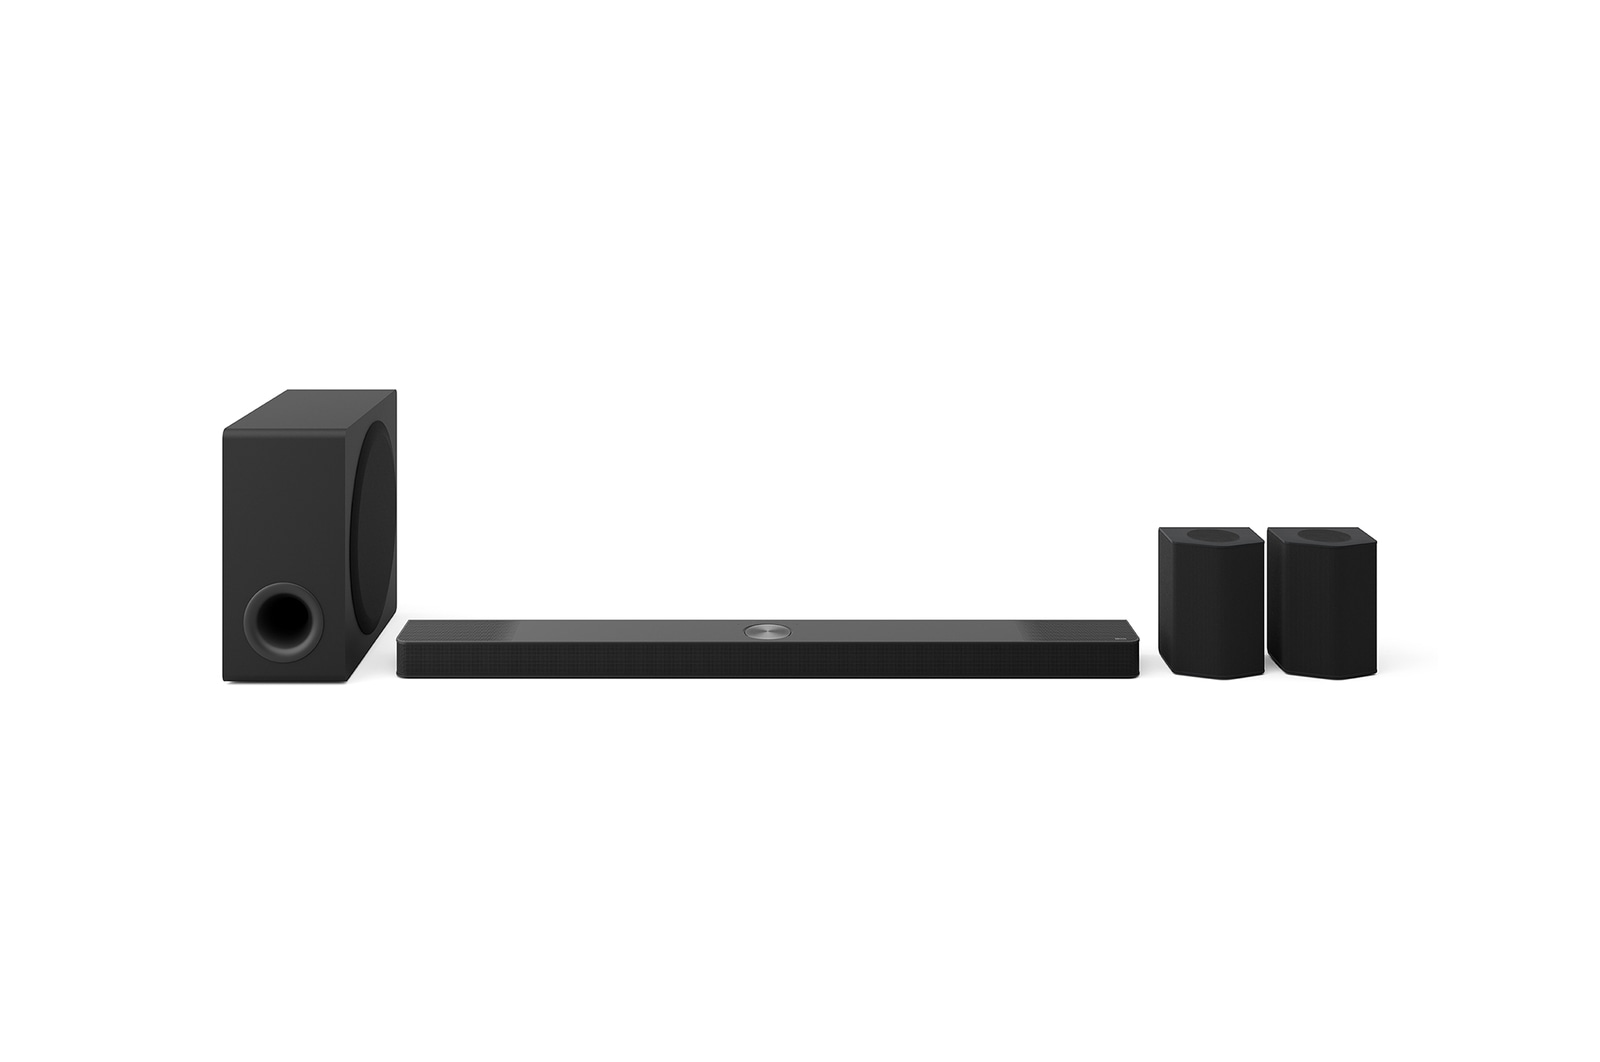 Front view of Soundbar, subwoofer, and Rear Speakers